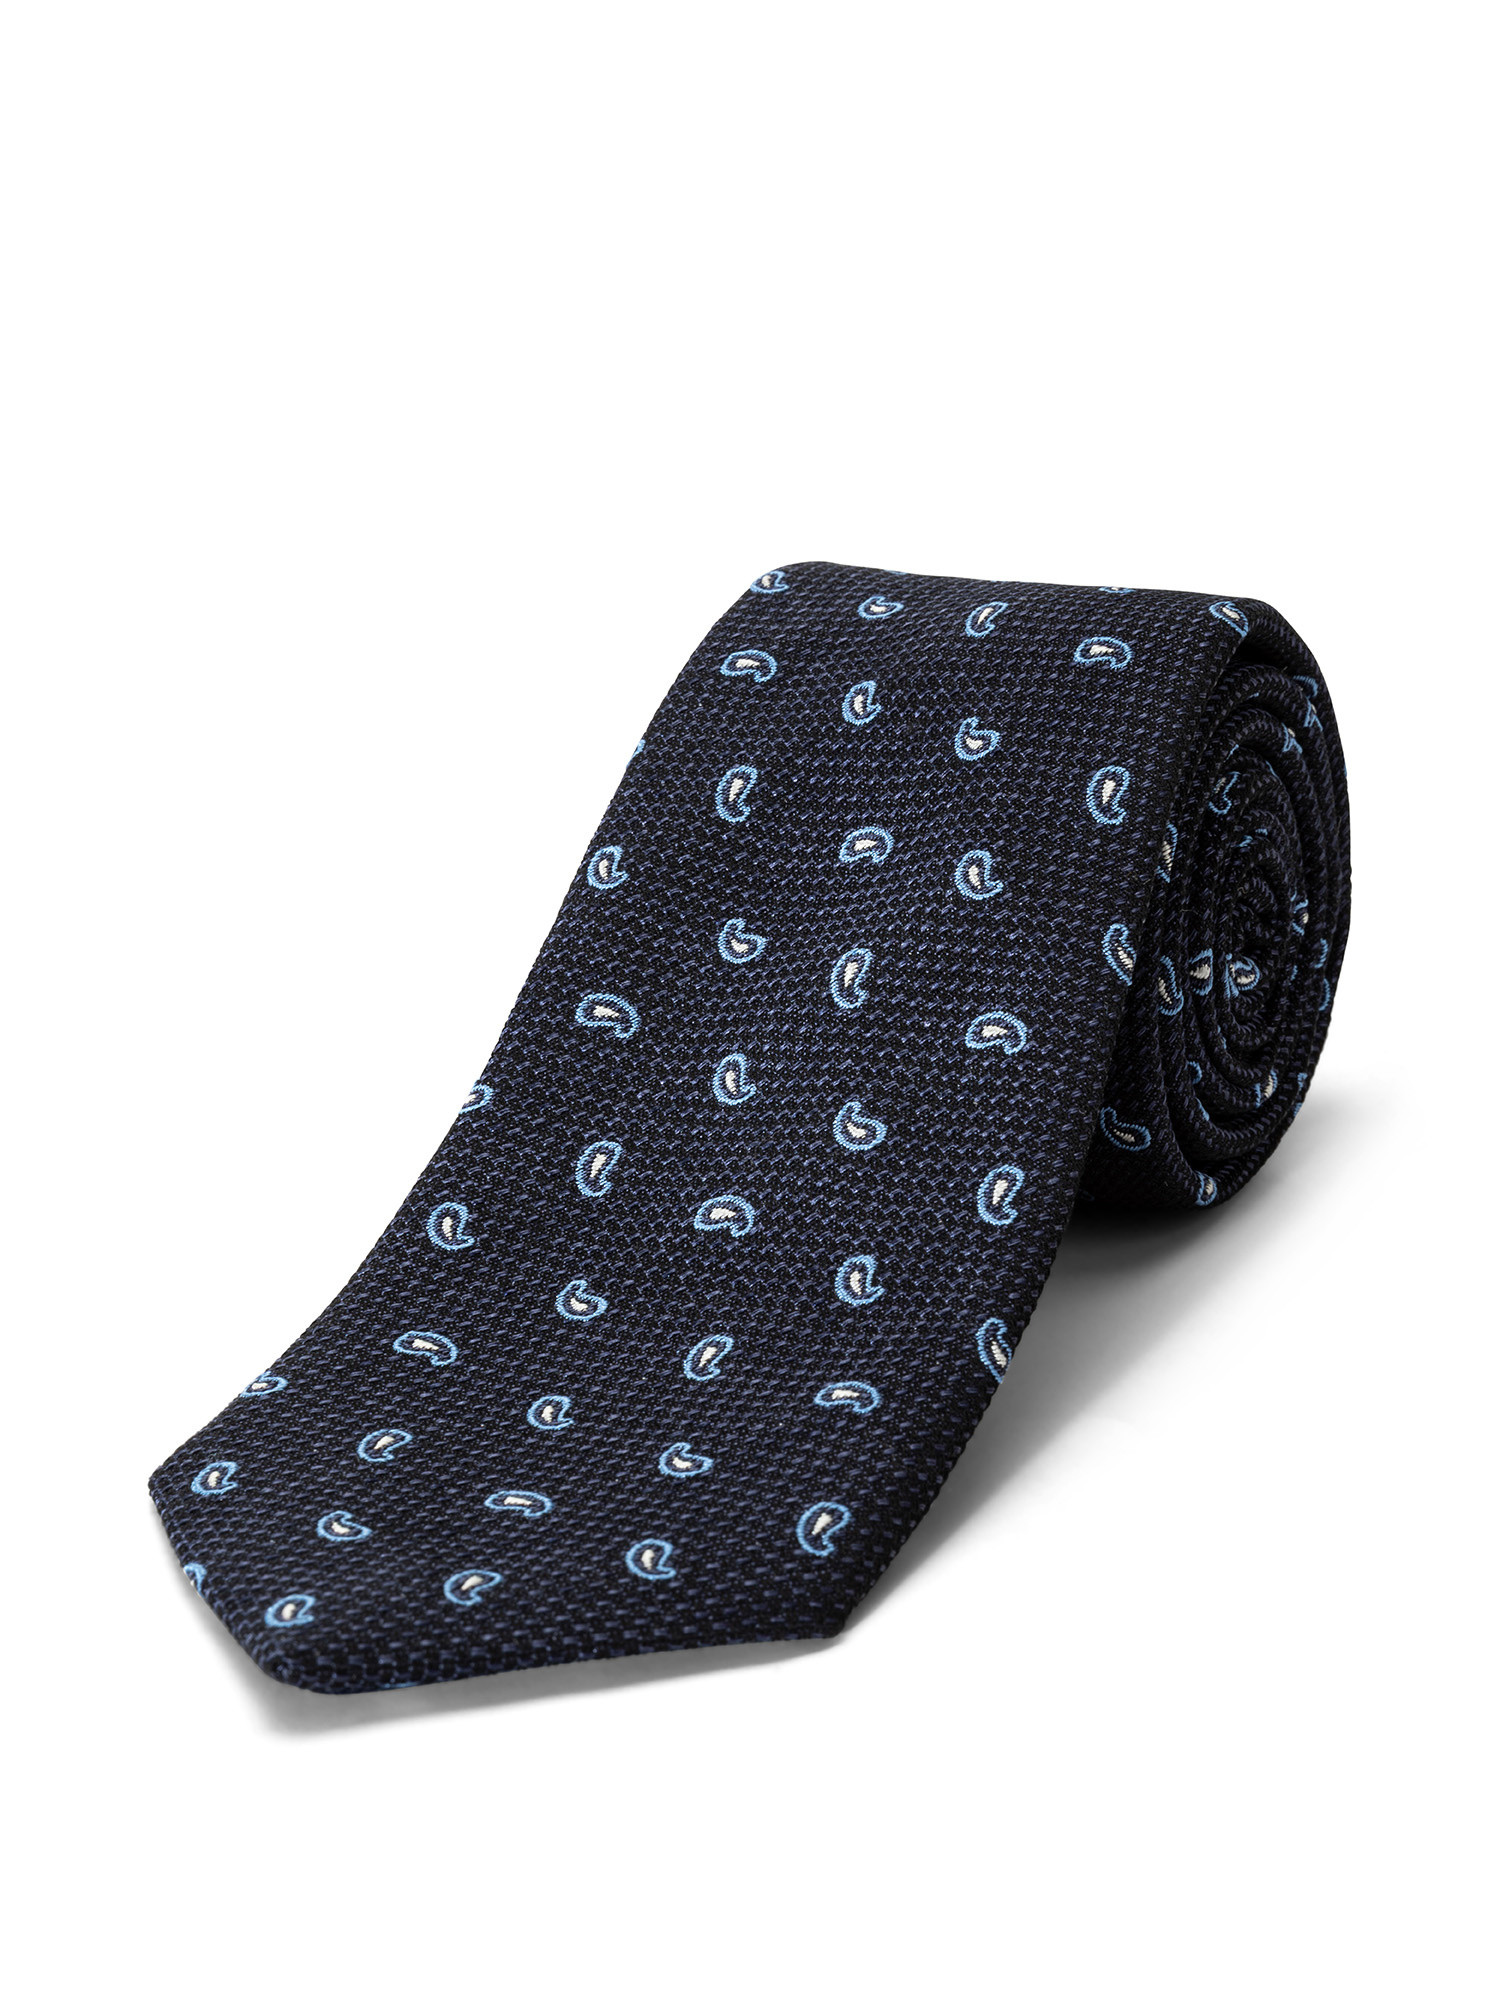 Luca D'Altieri - Patterned silk and cotton tie, Blue, large image number 0